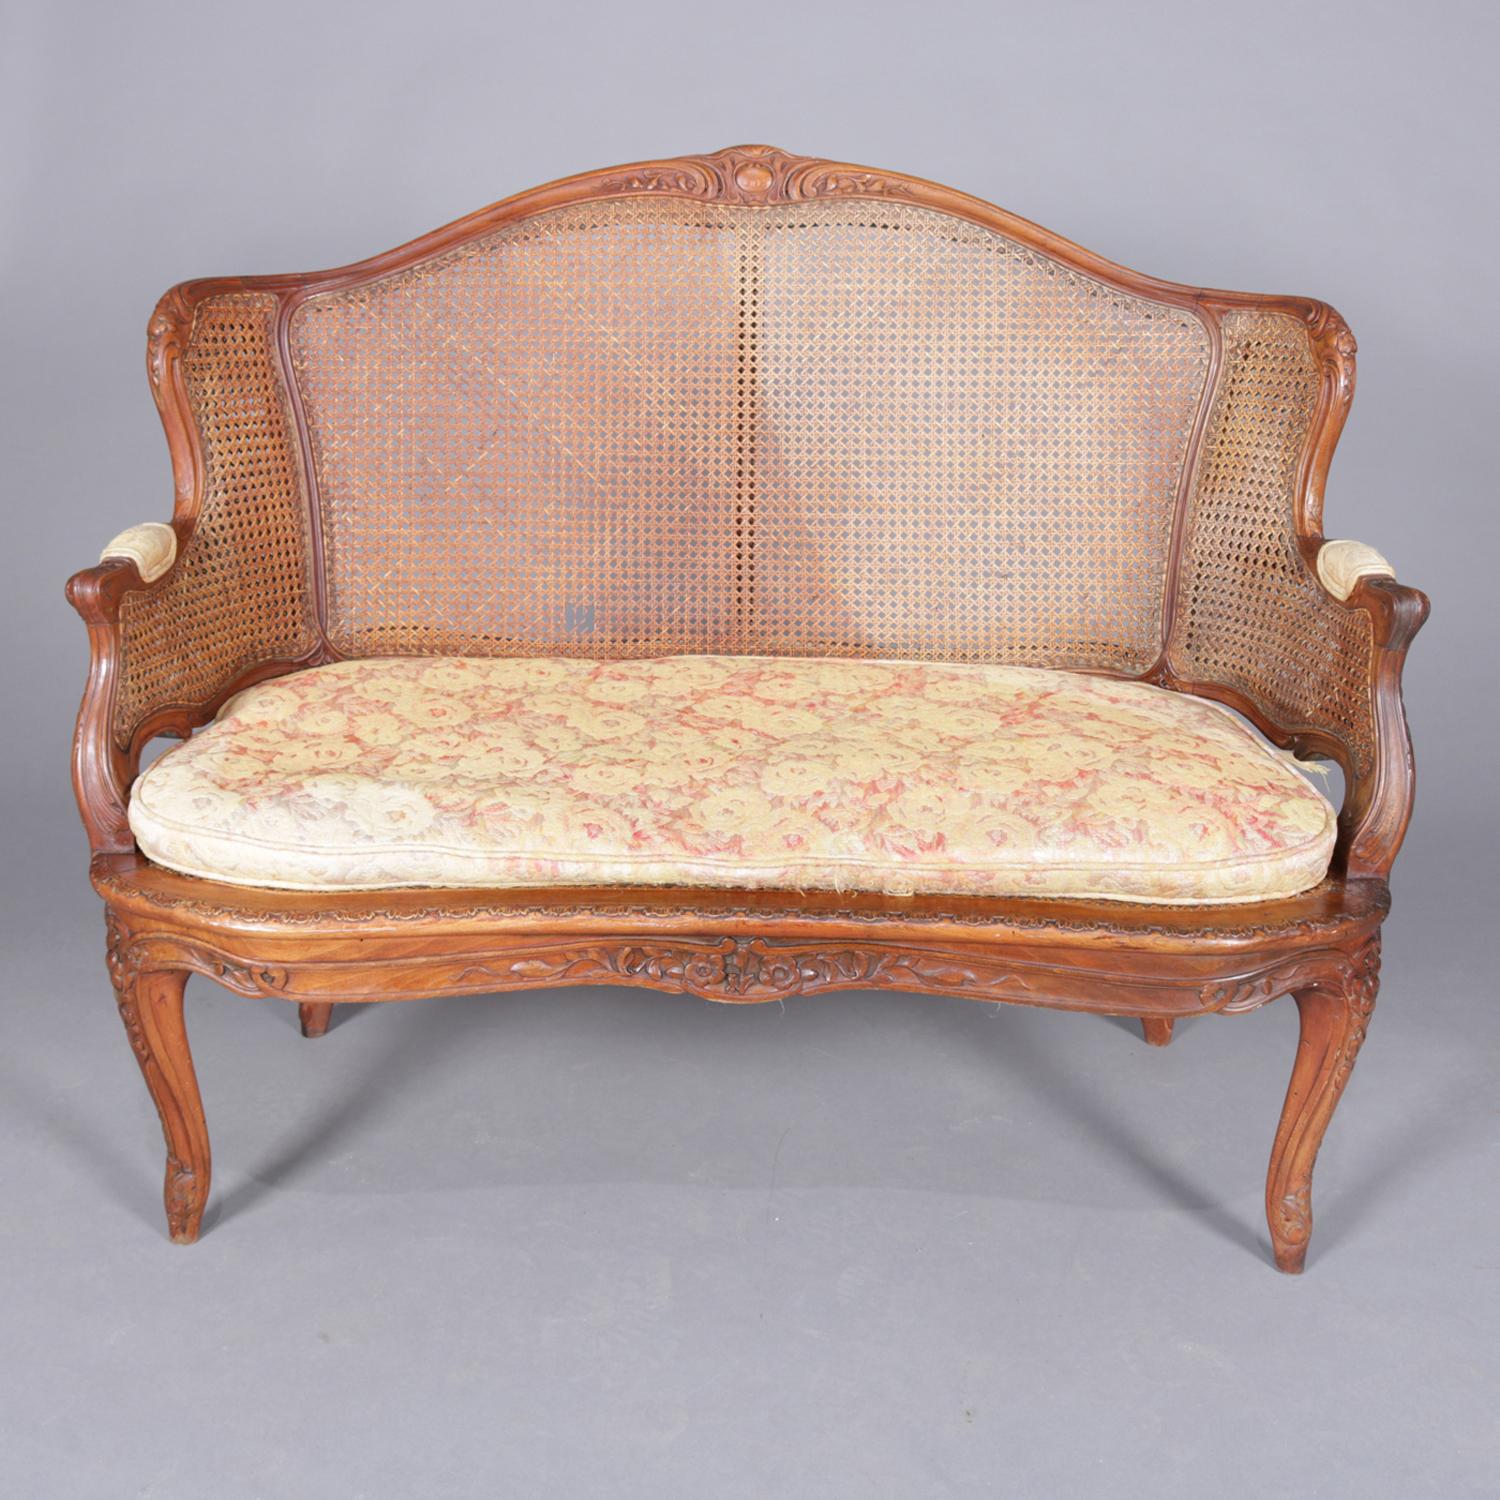 An antique French Louis XIV settee features wormwood walnut frame with carved scroll and foliate crest, scroll form arms and raised on cabriole legs, caned back, arms and seat, 19th century.

Measures: 385